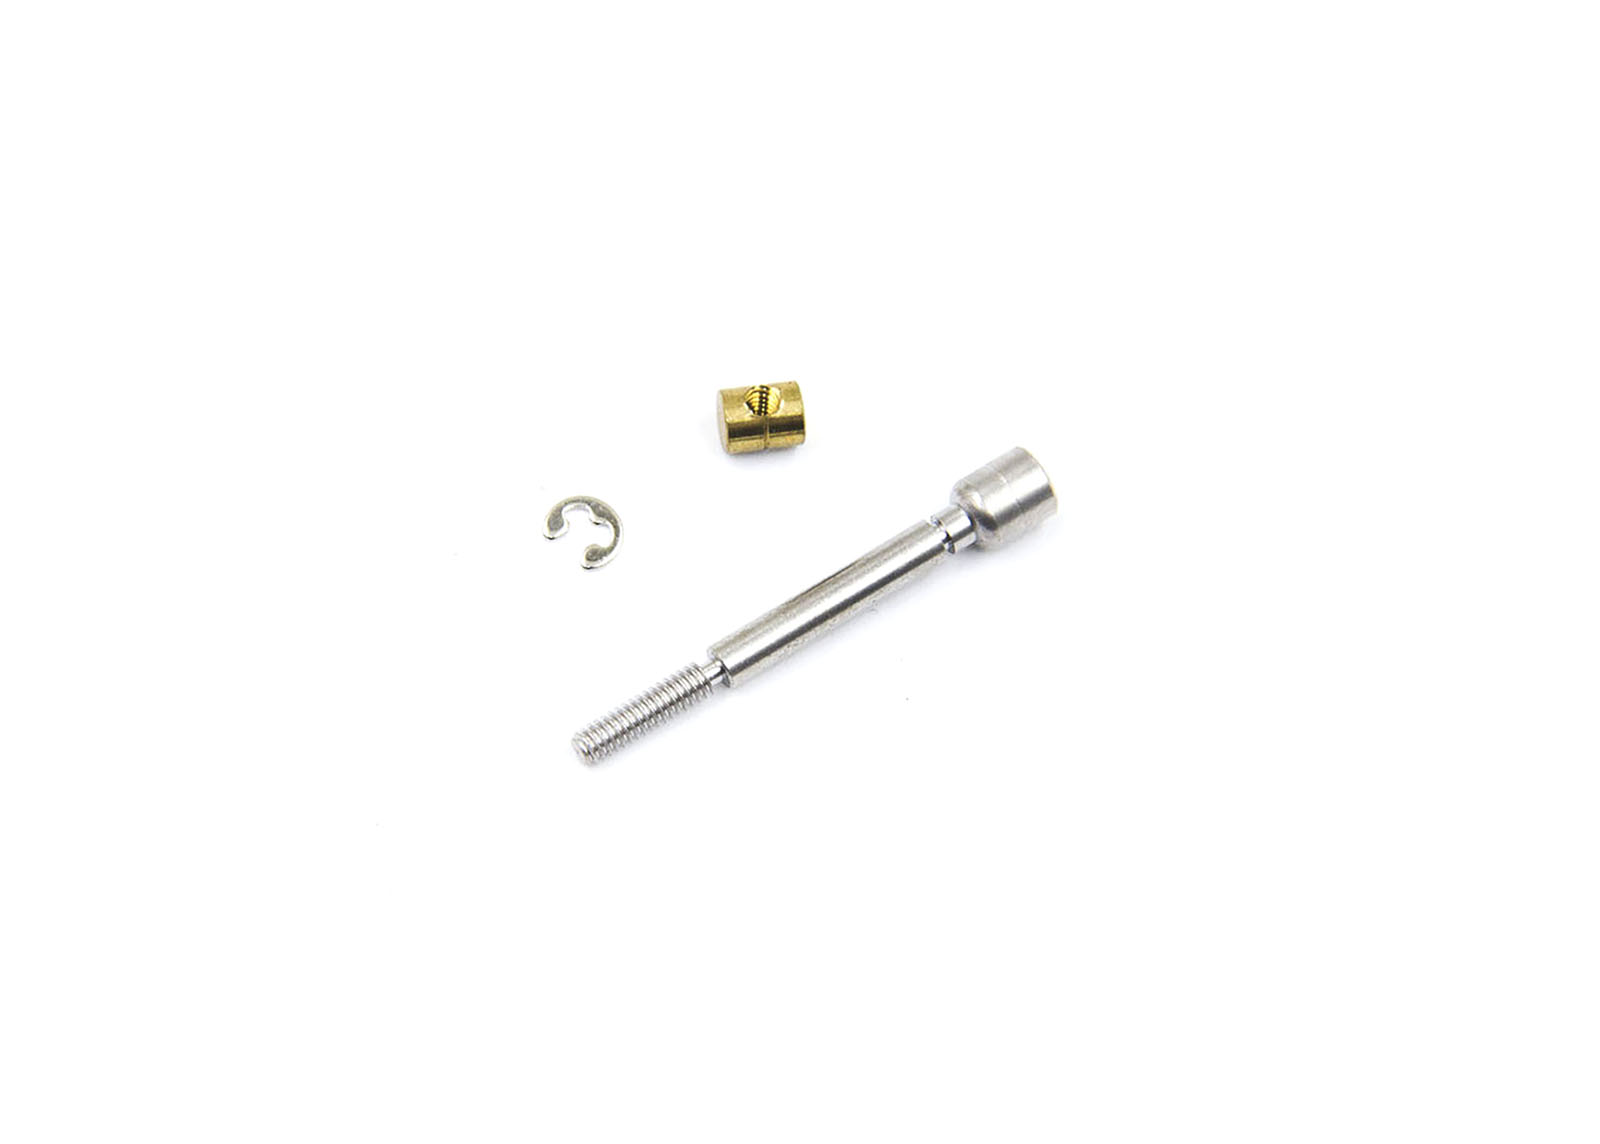 MOD24 / SSG24 Trigger Stop Screw with nut - Modify Bolt Action Rifle Parts